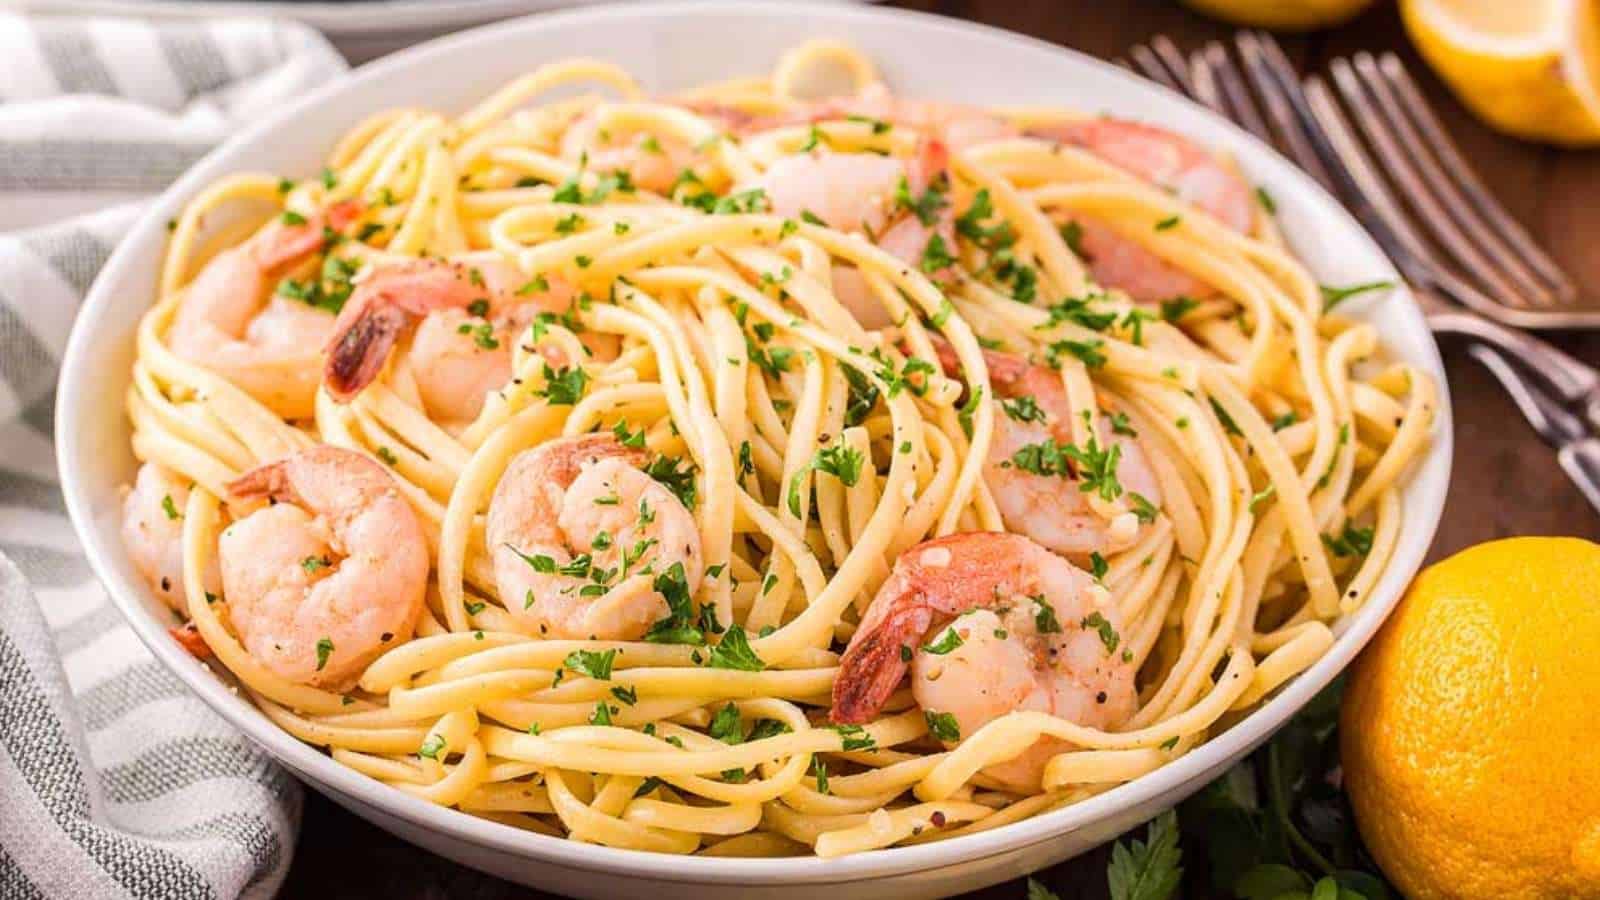 A bowl of pasta with shrimp and lemons.